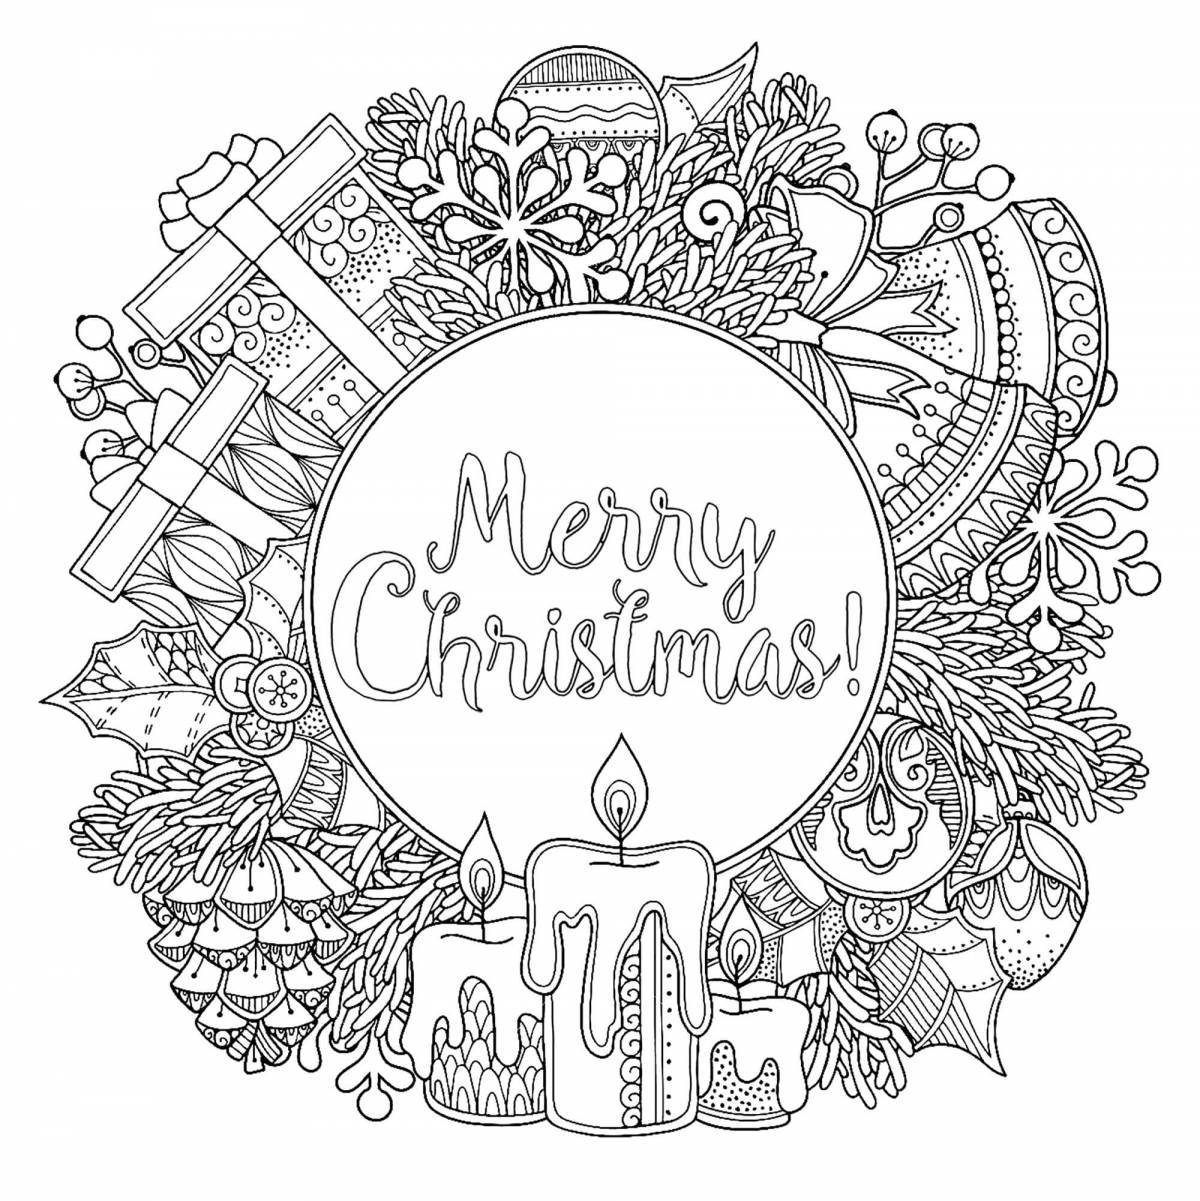 Large Christmas wreath coloring page